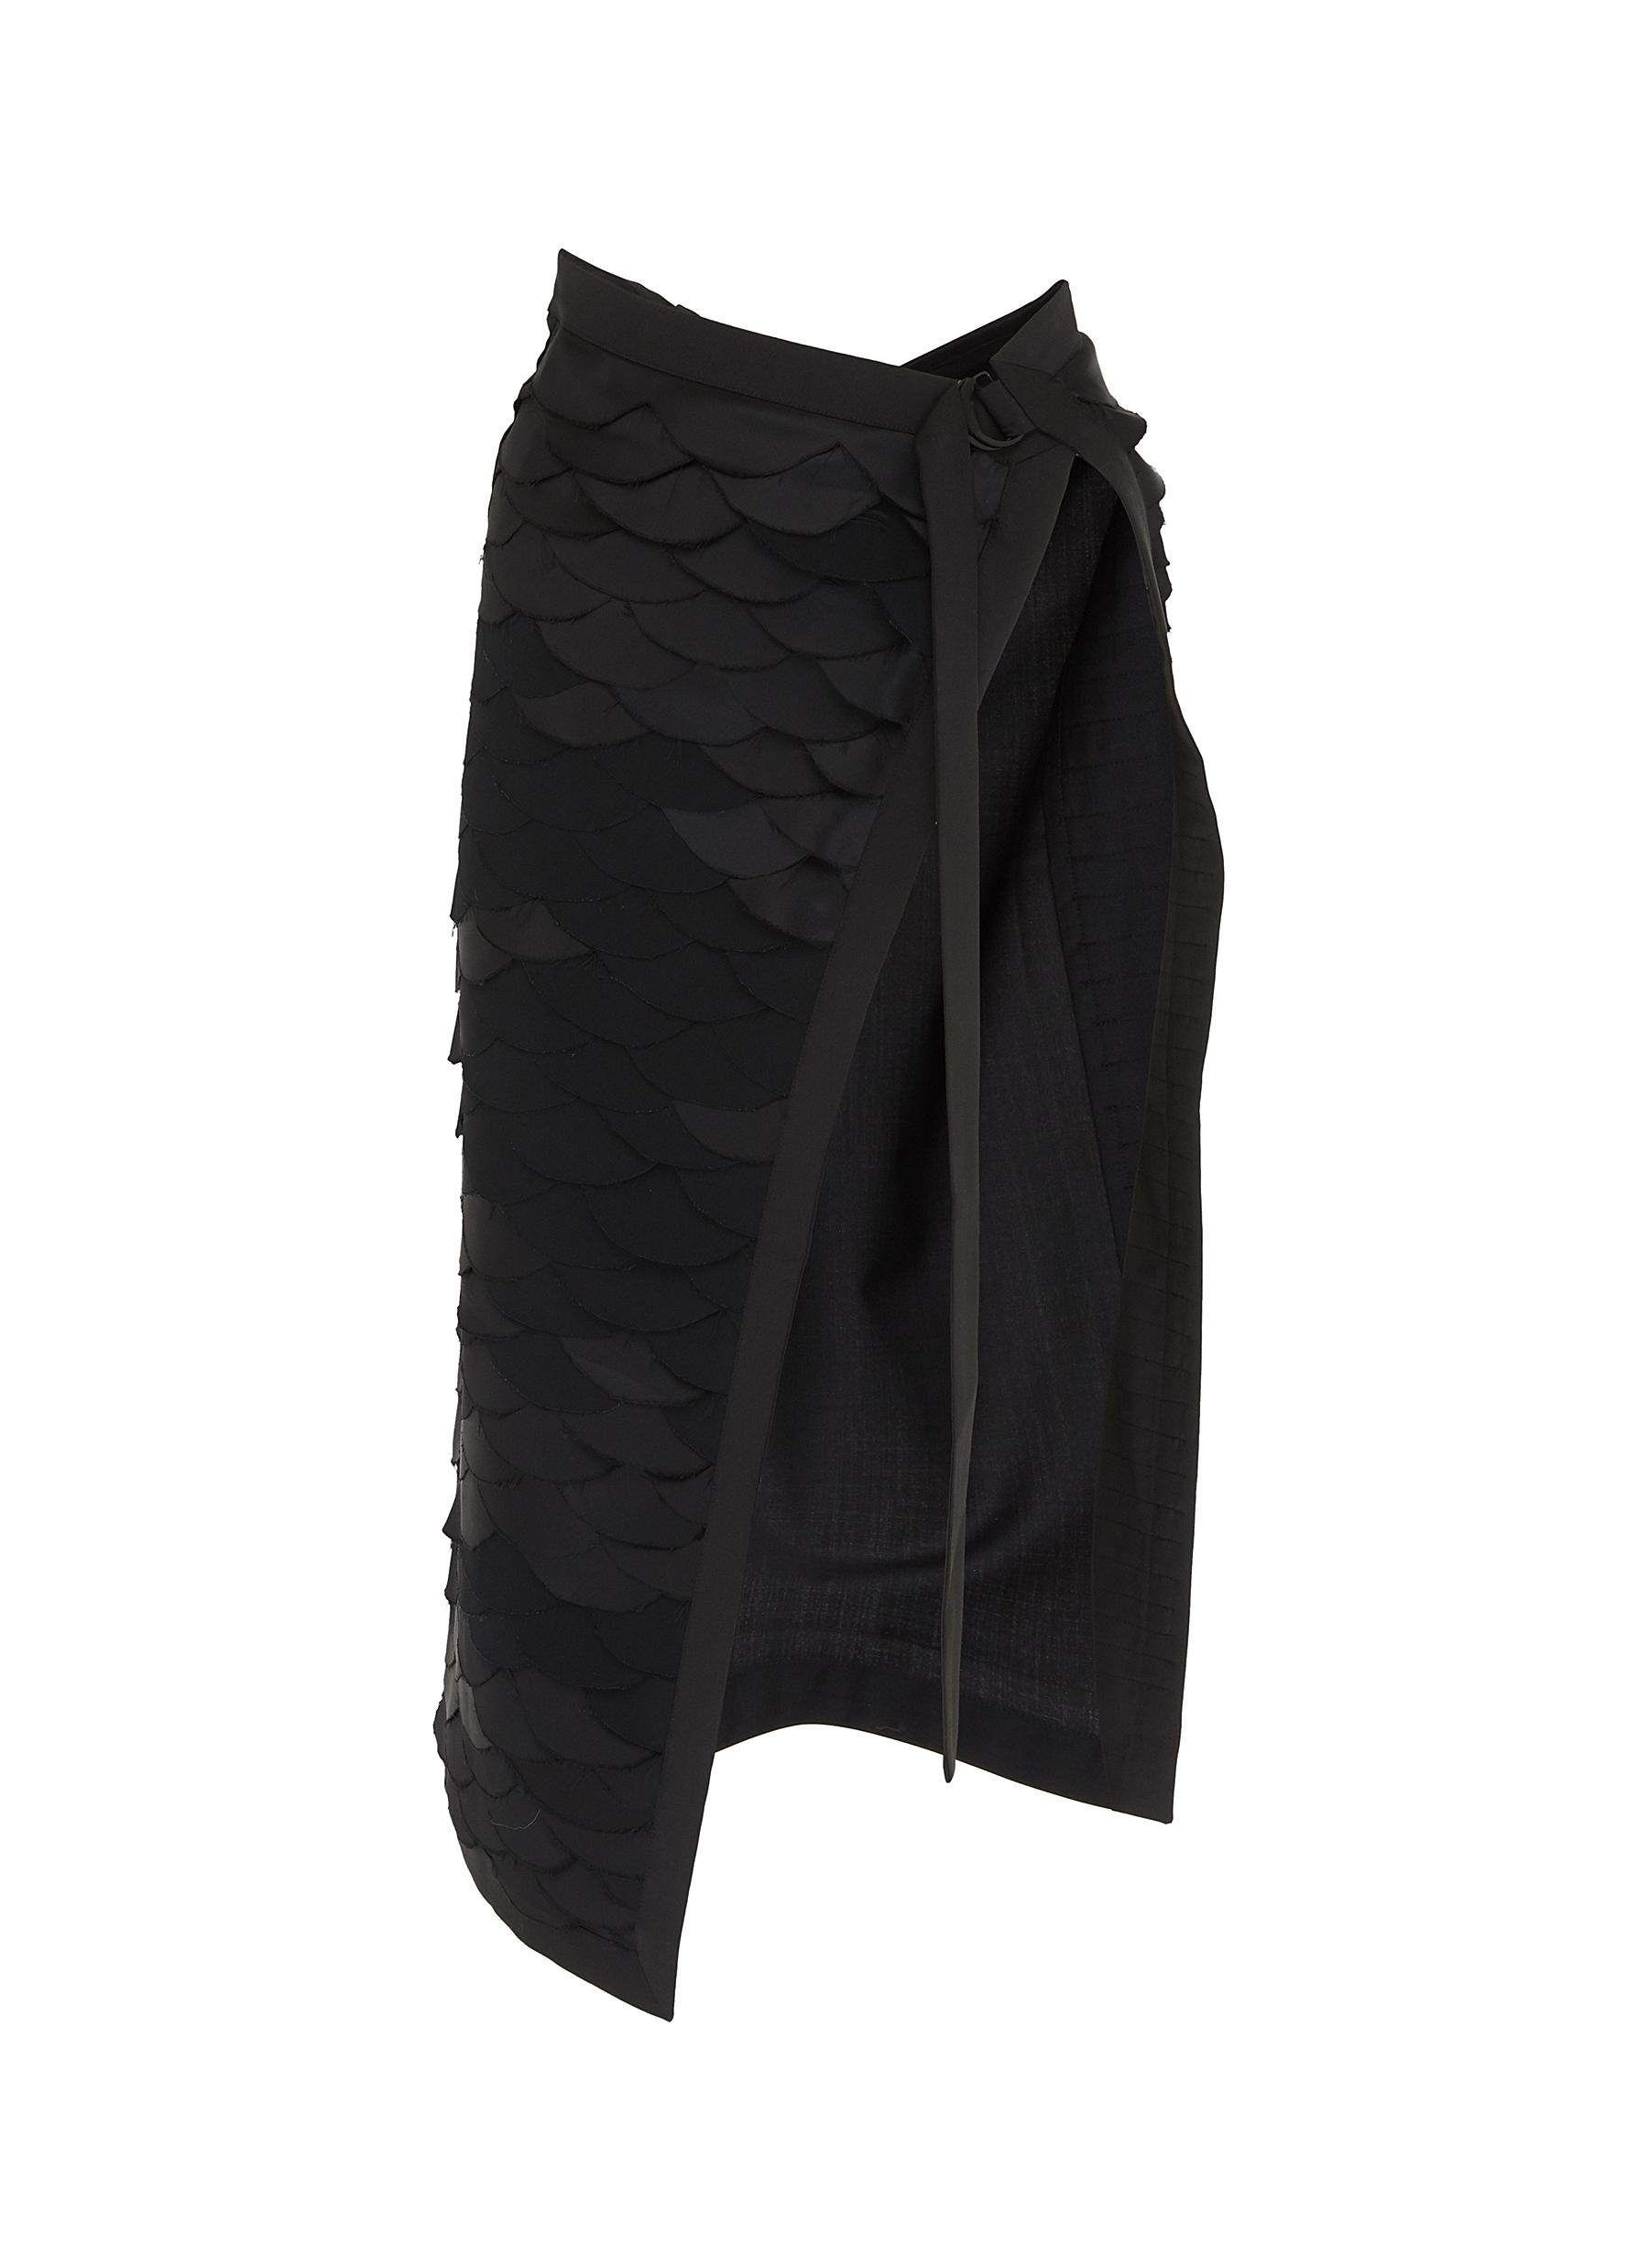 BEVZA 'Fish Scales' Wrapped Half Skirt | Smart Closet